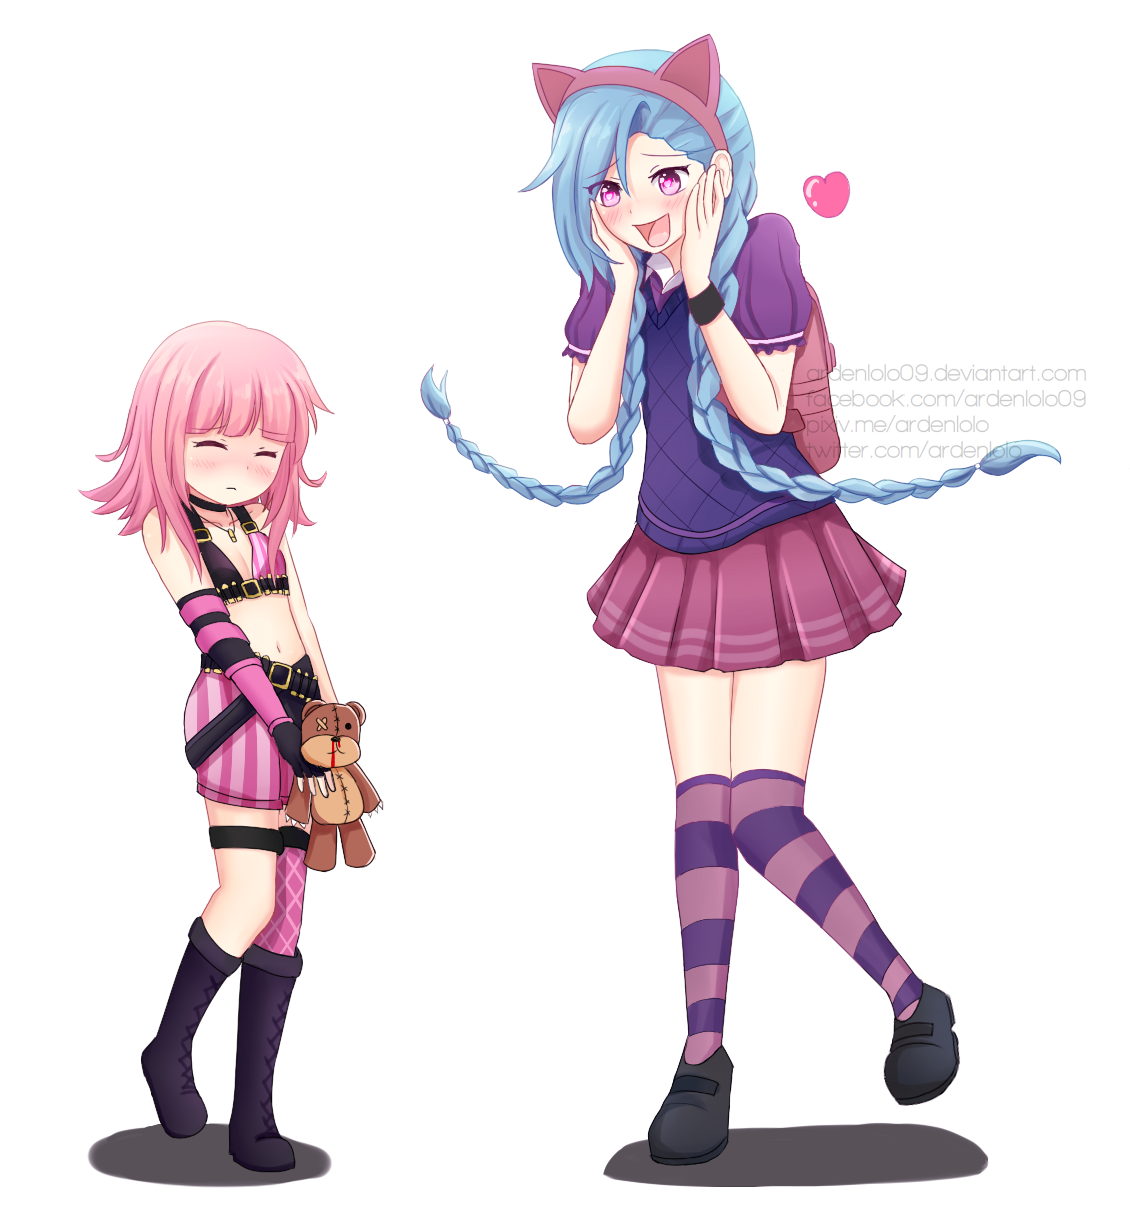 Annie and Jinx Outfit Swap